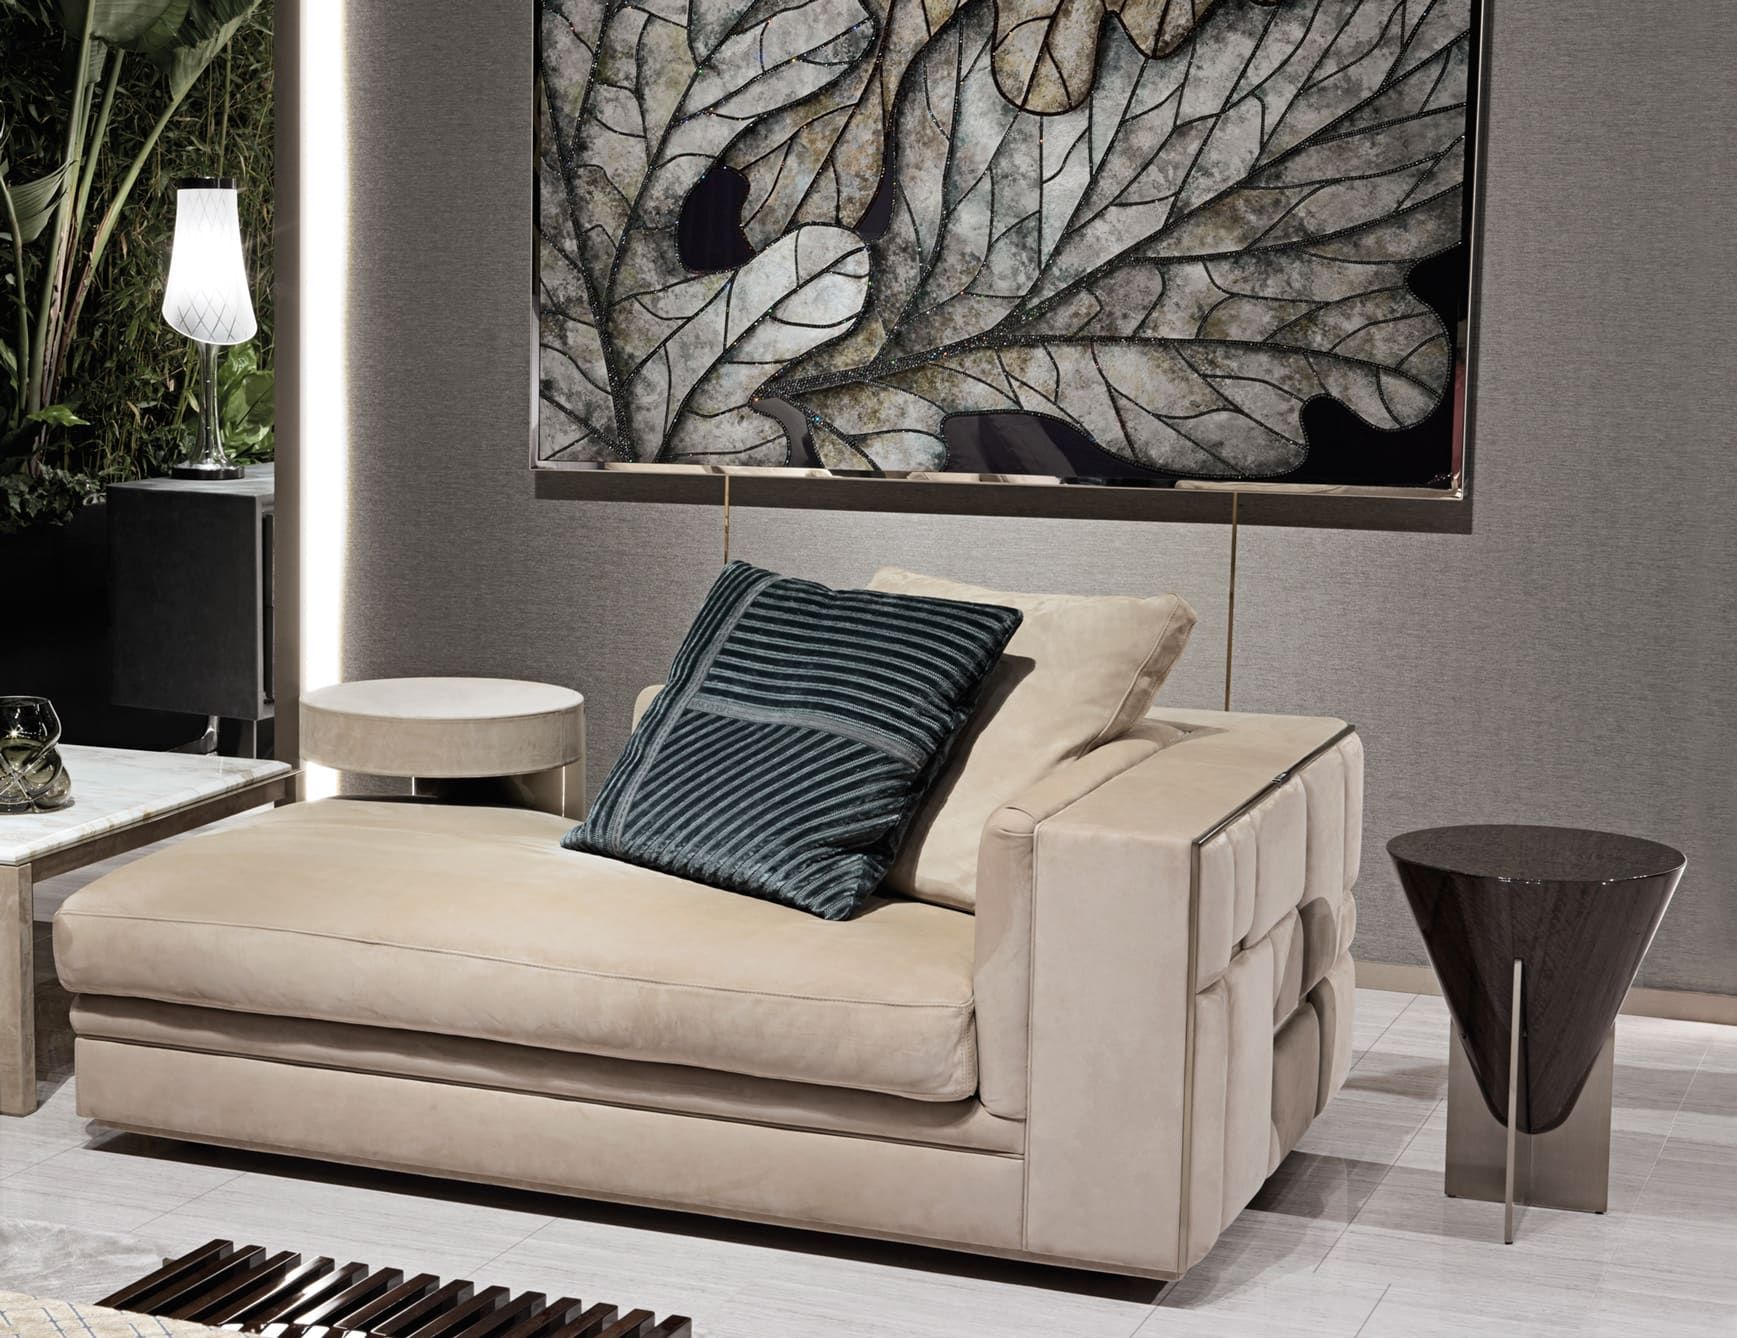 Babylon modern luxury lounge chair with beige leather